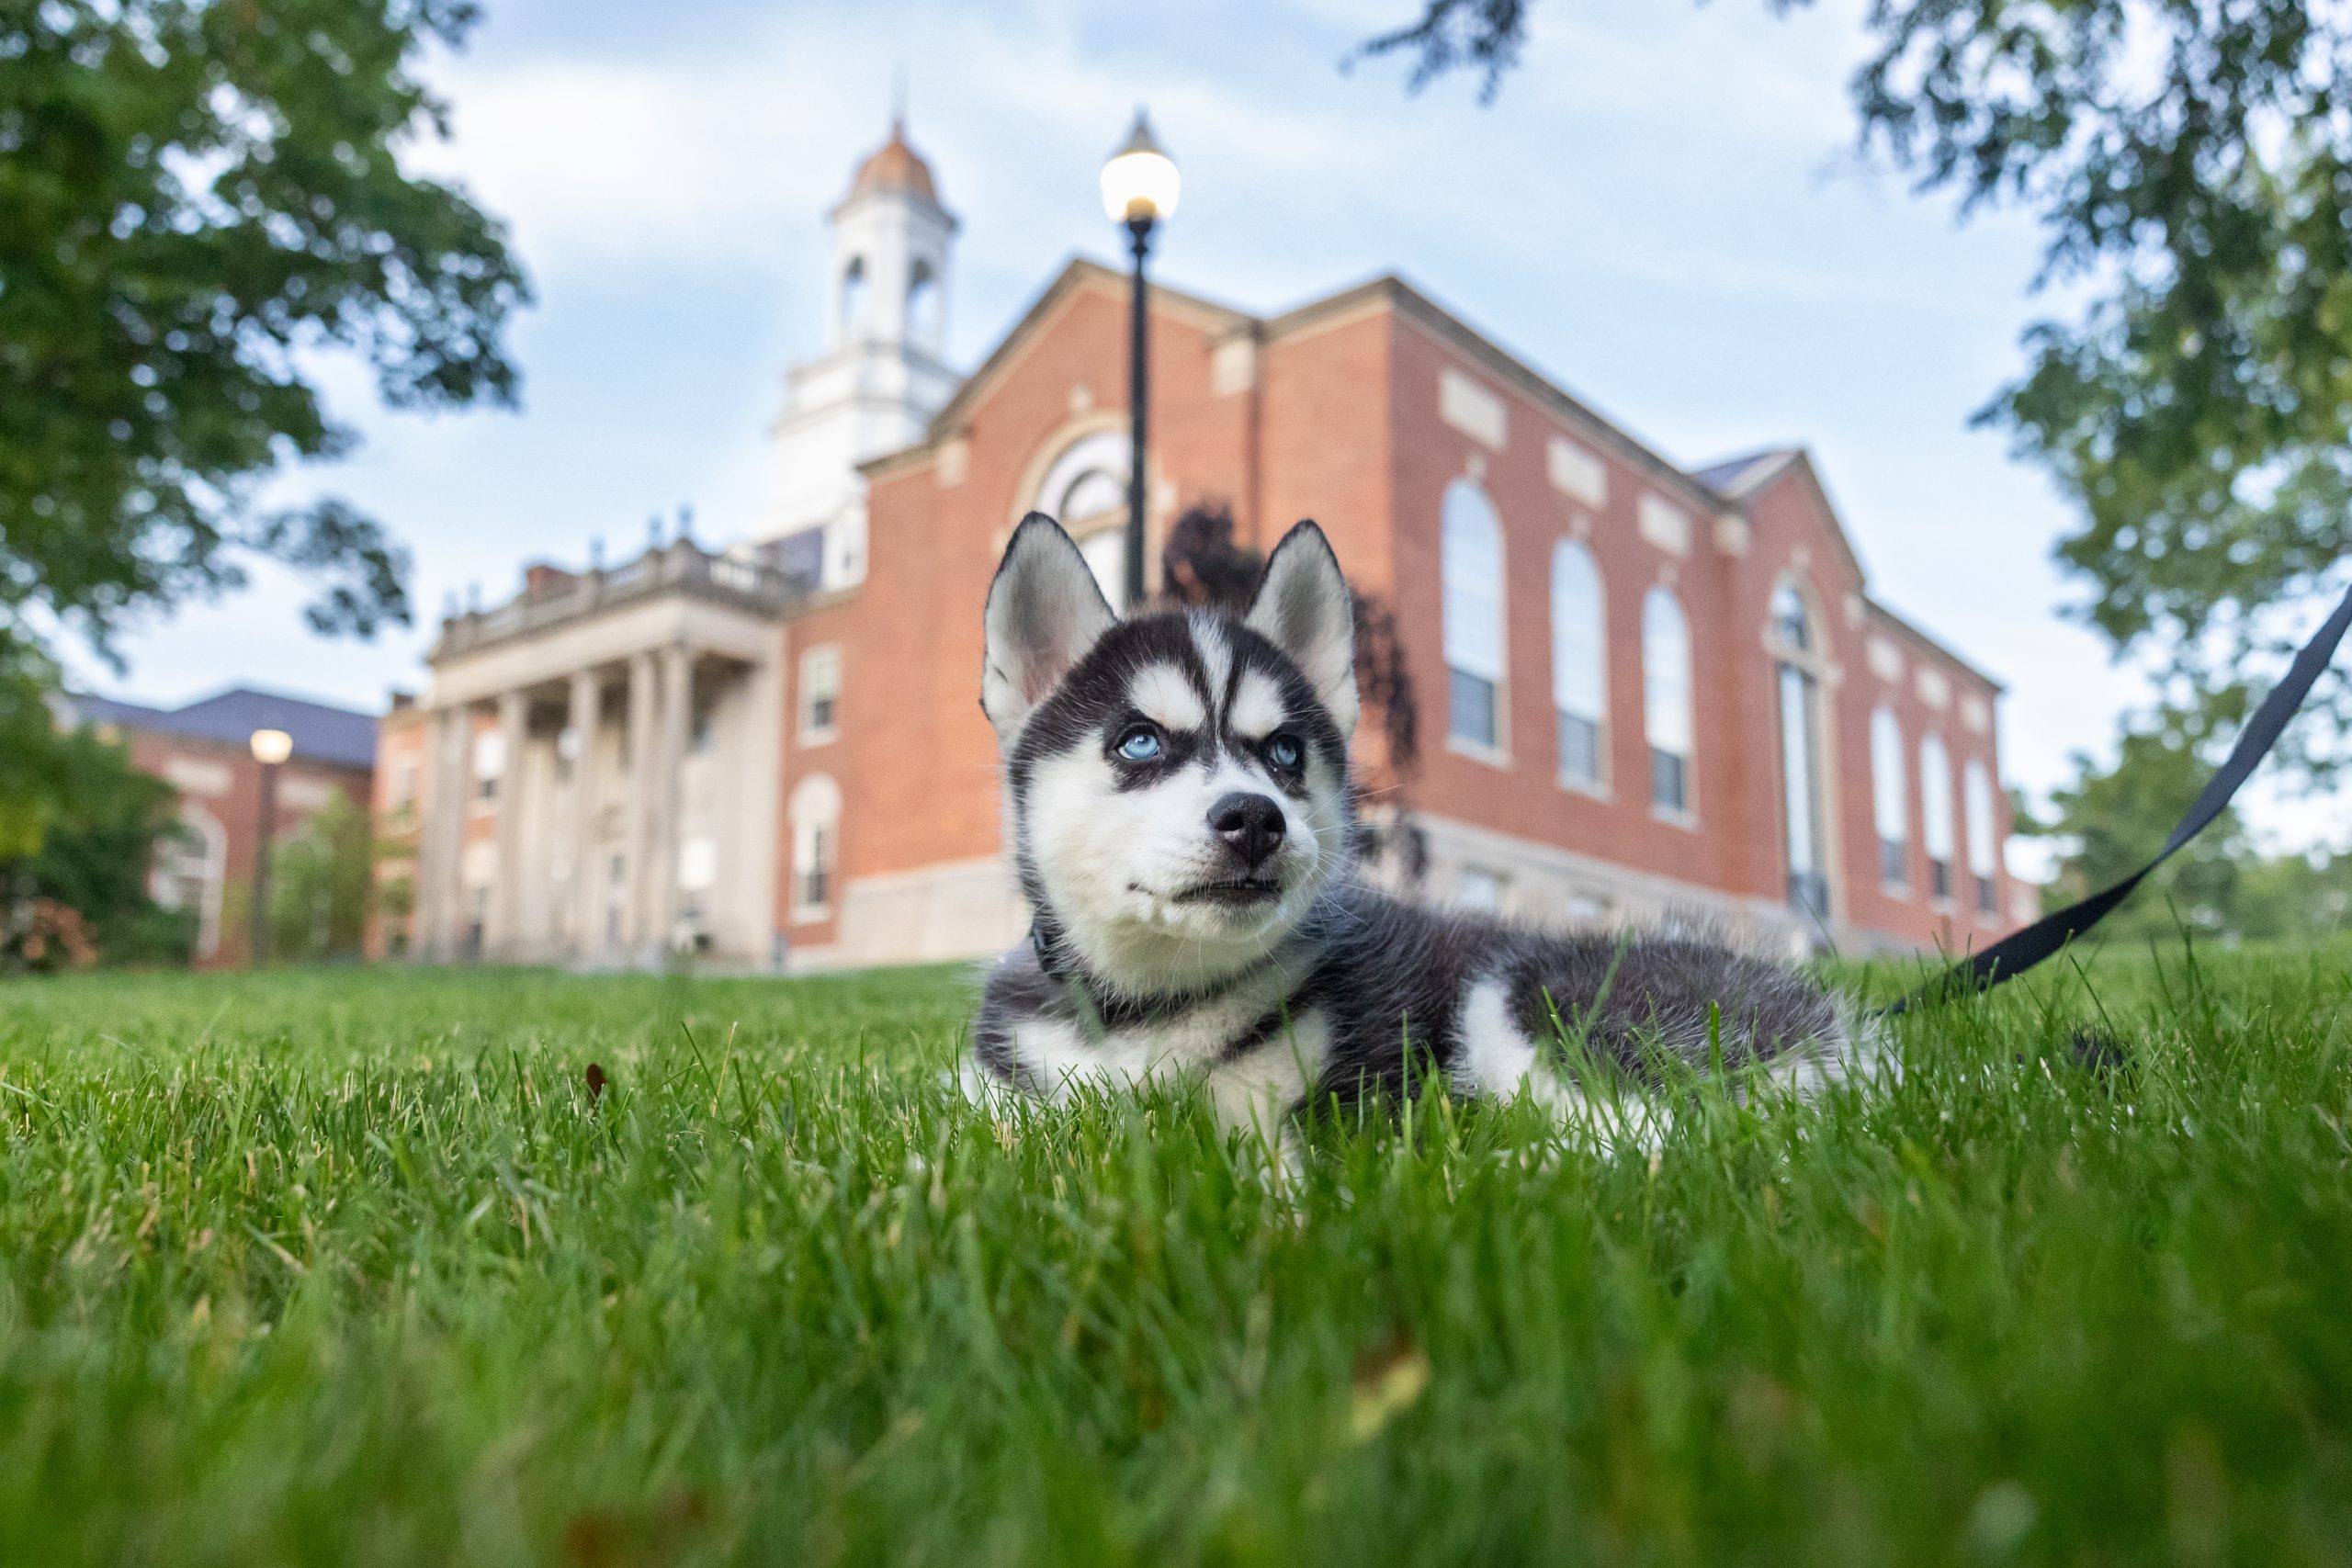 Jonathan XV poses outside of Wilbur Cross on his first trip to the Storrs campus.